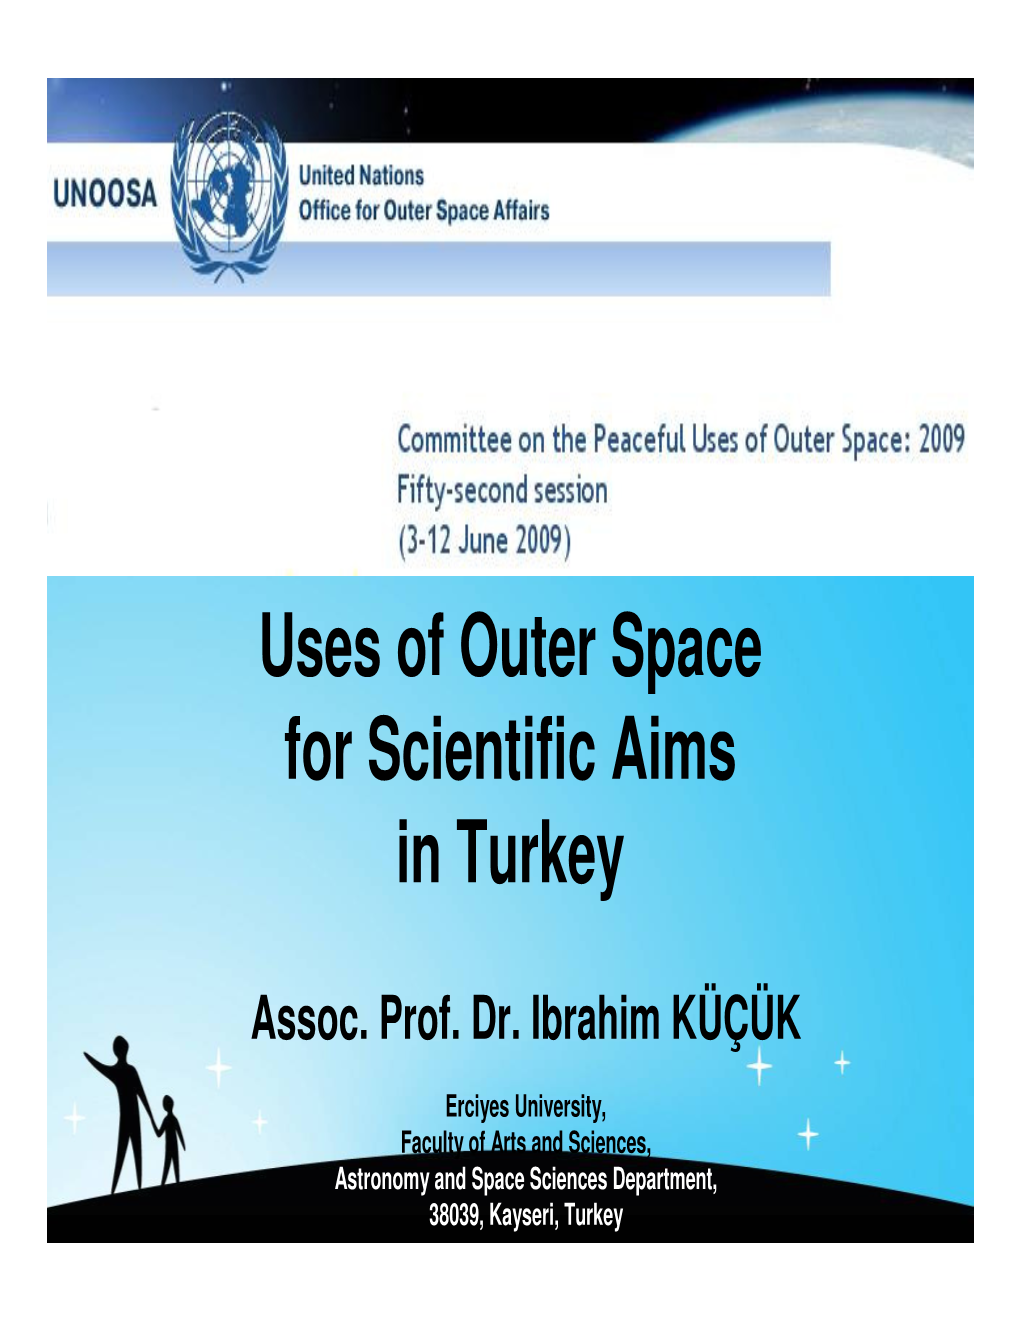 Uses of Outer Space for Scientific Aims in Turkey